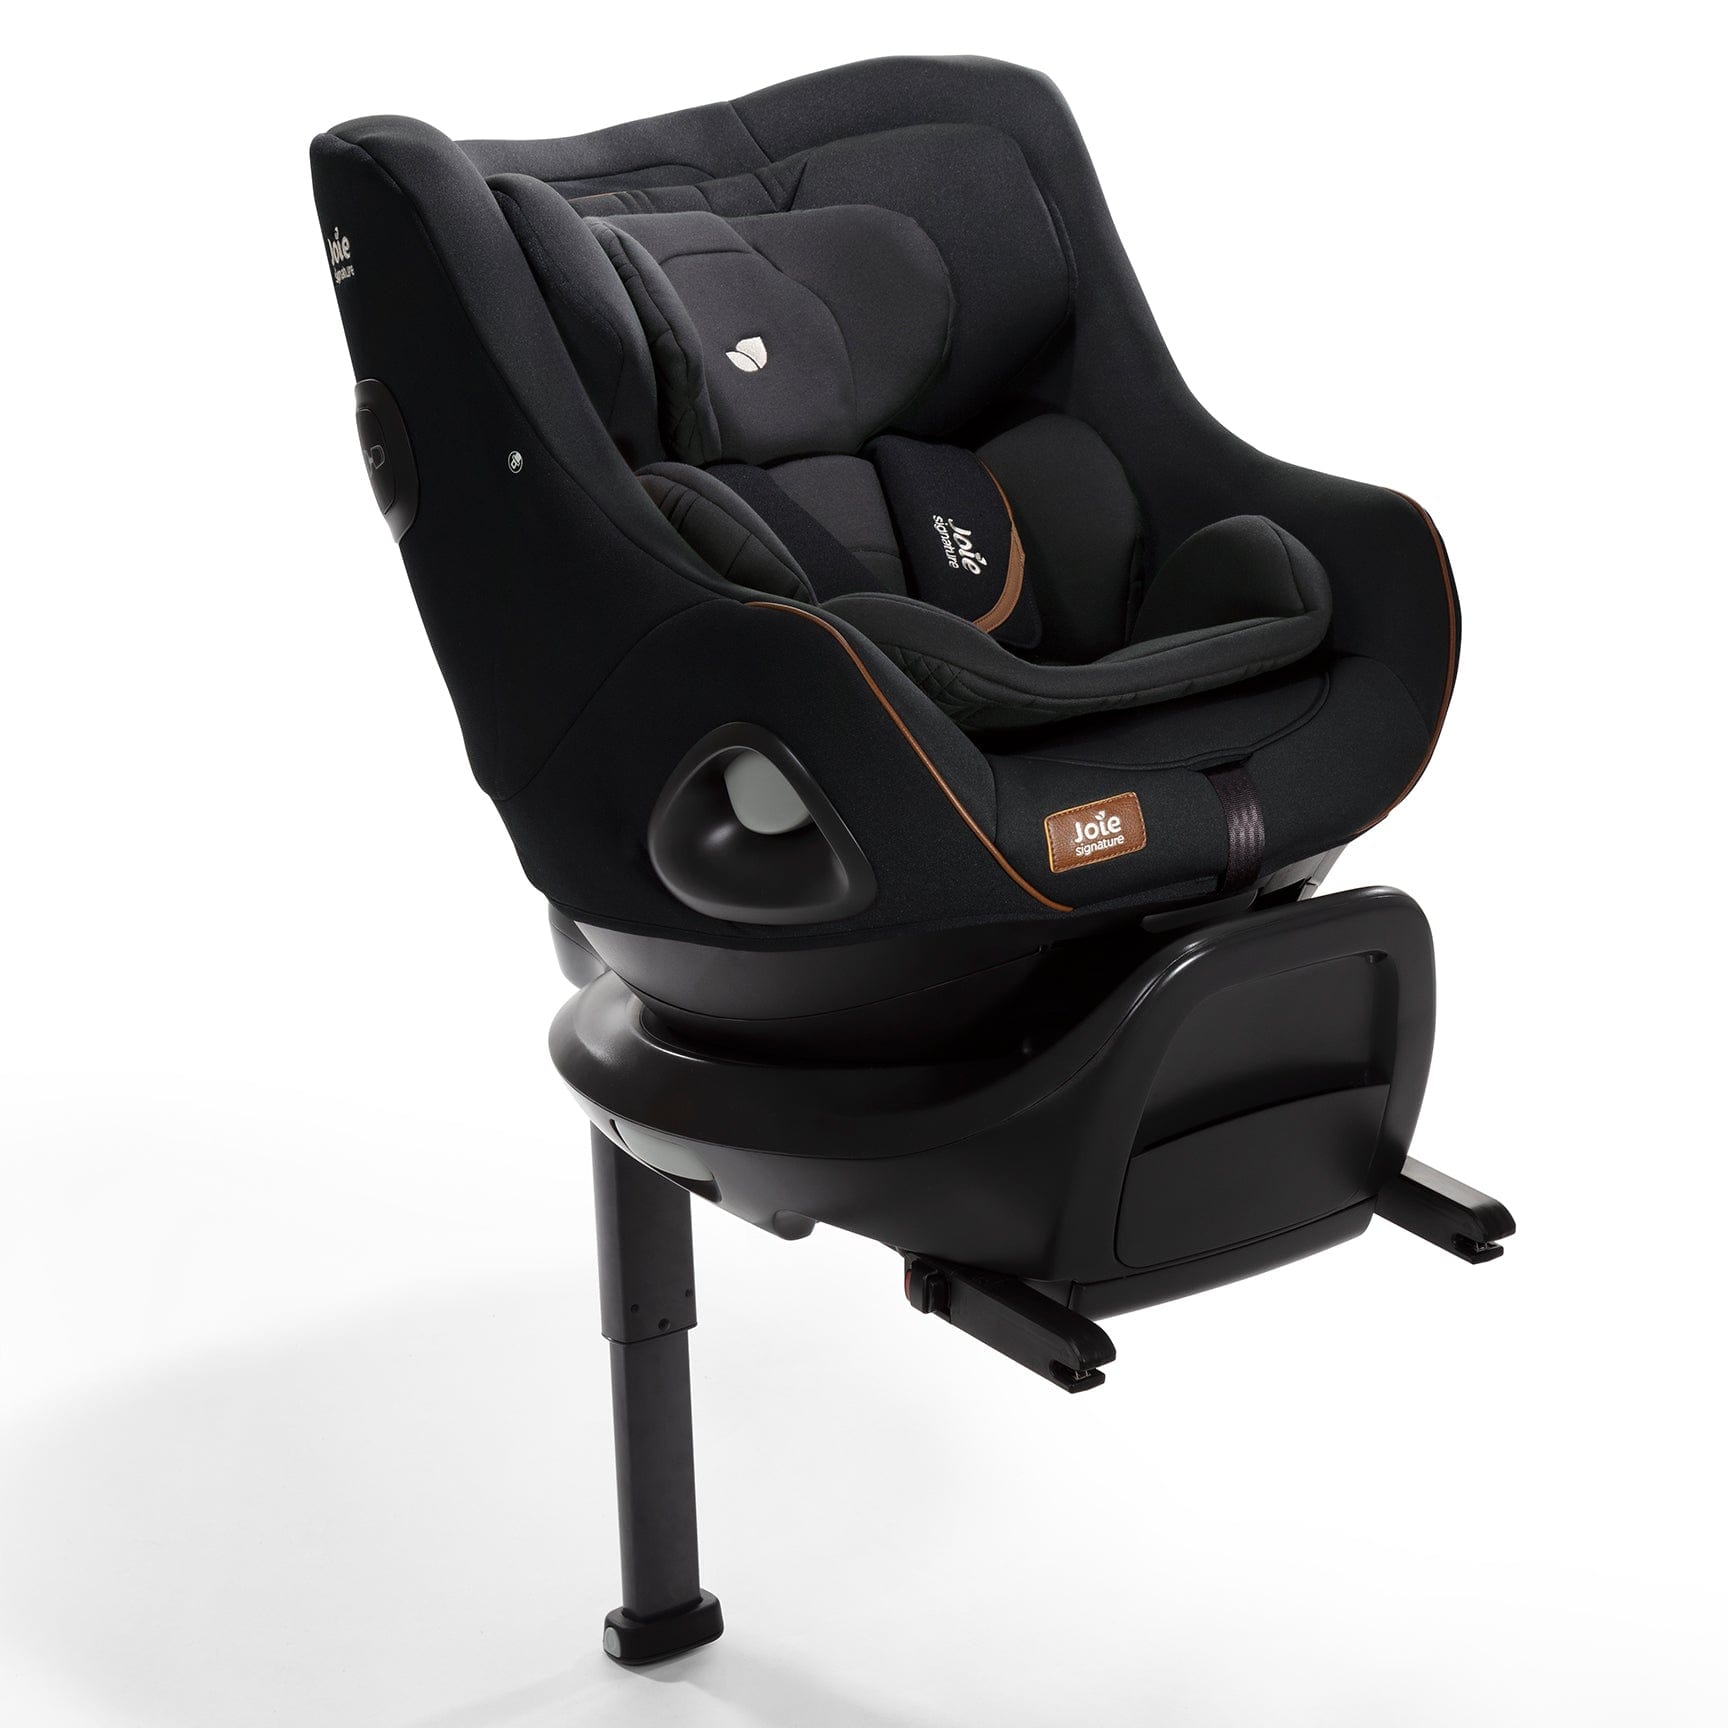 Joie i-Harbour in Eclipse Swivel Car Seats C214AAECL000 5056080612454